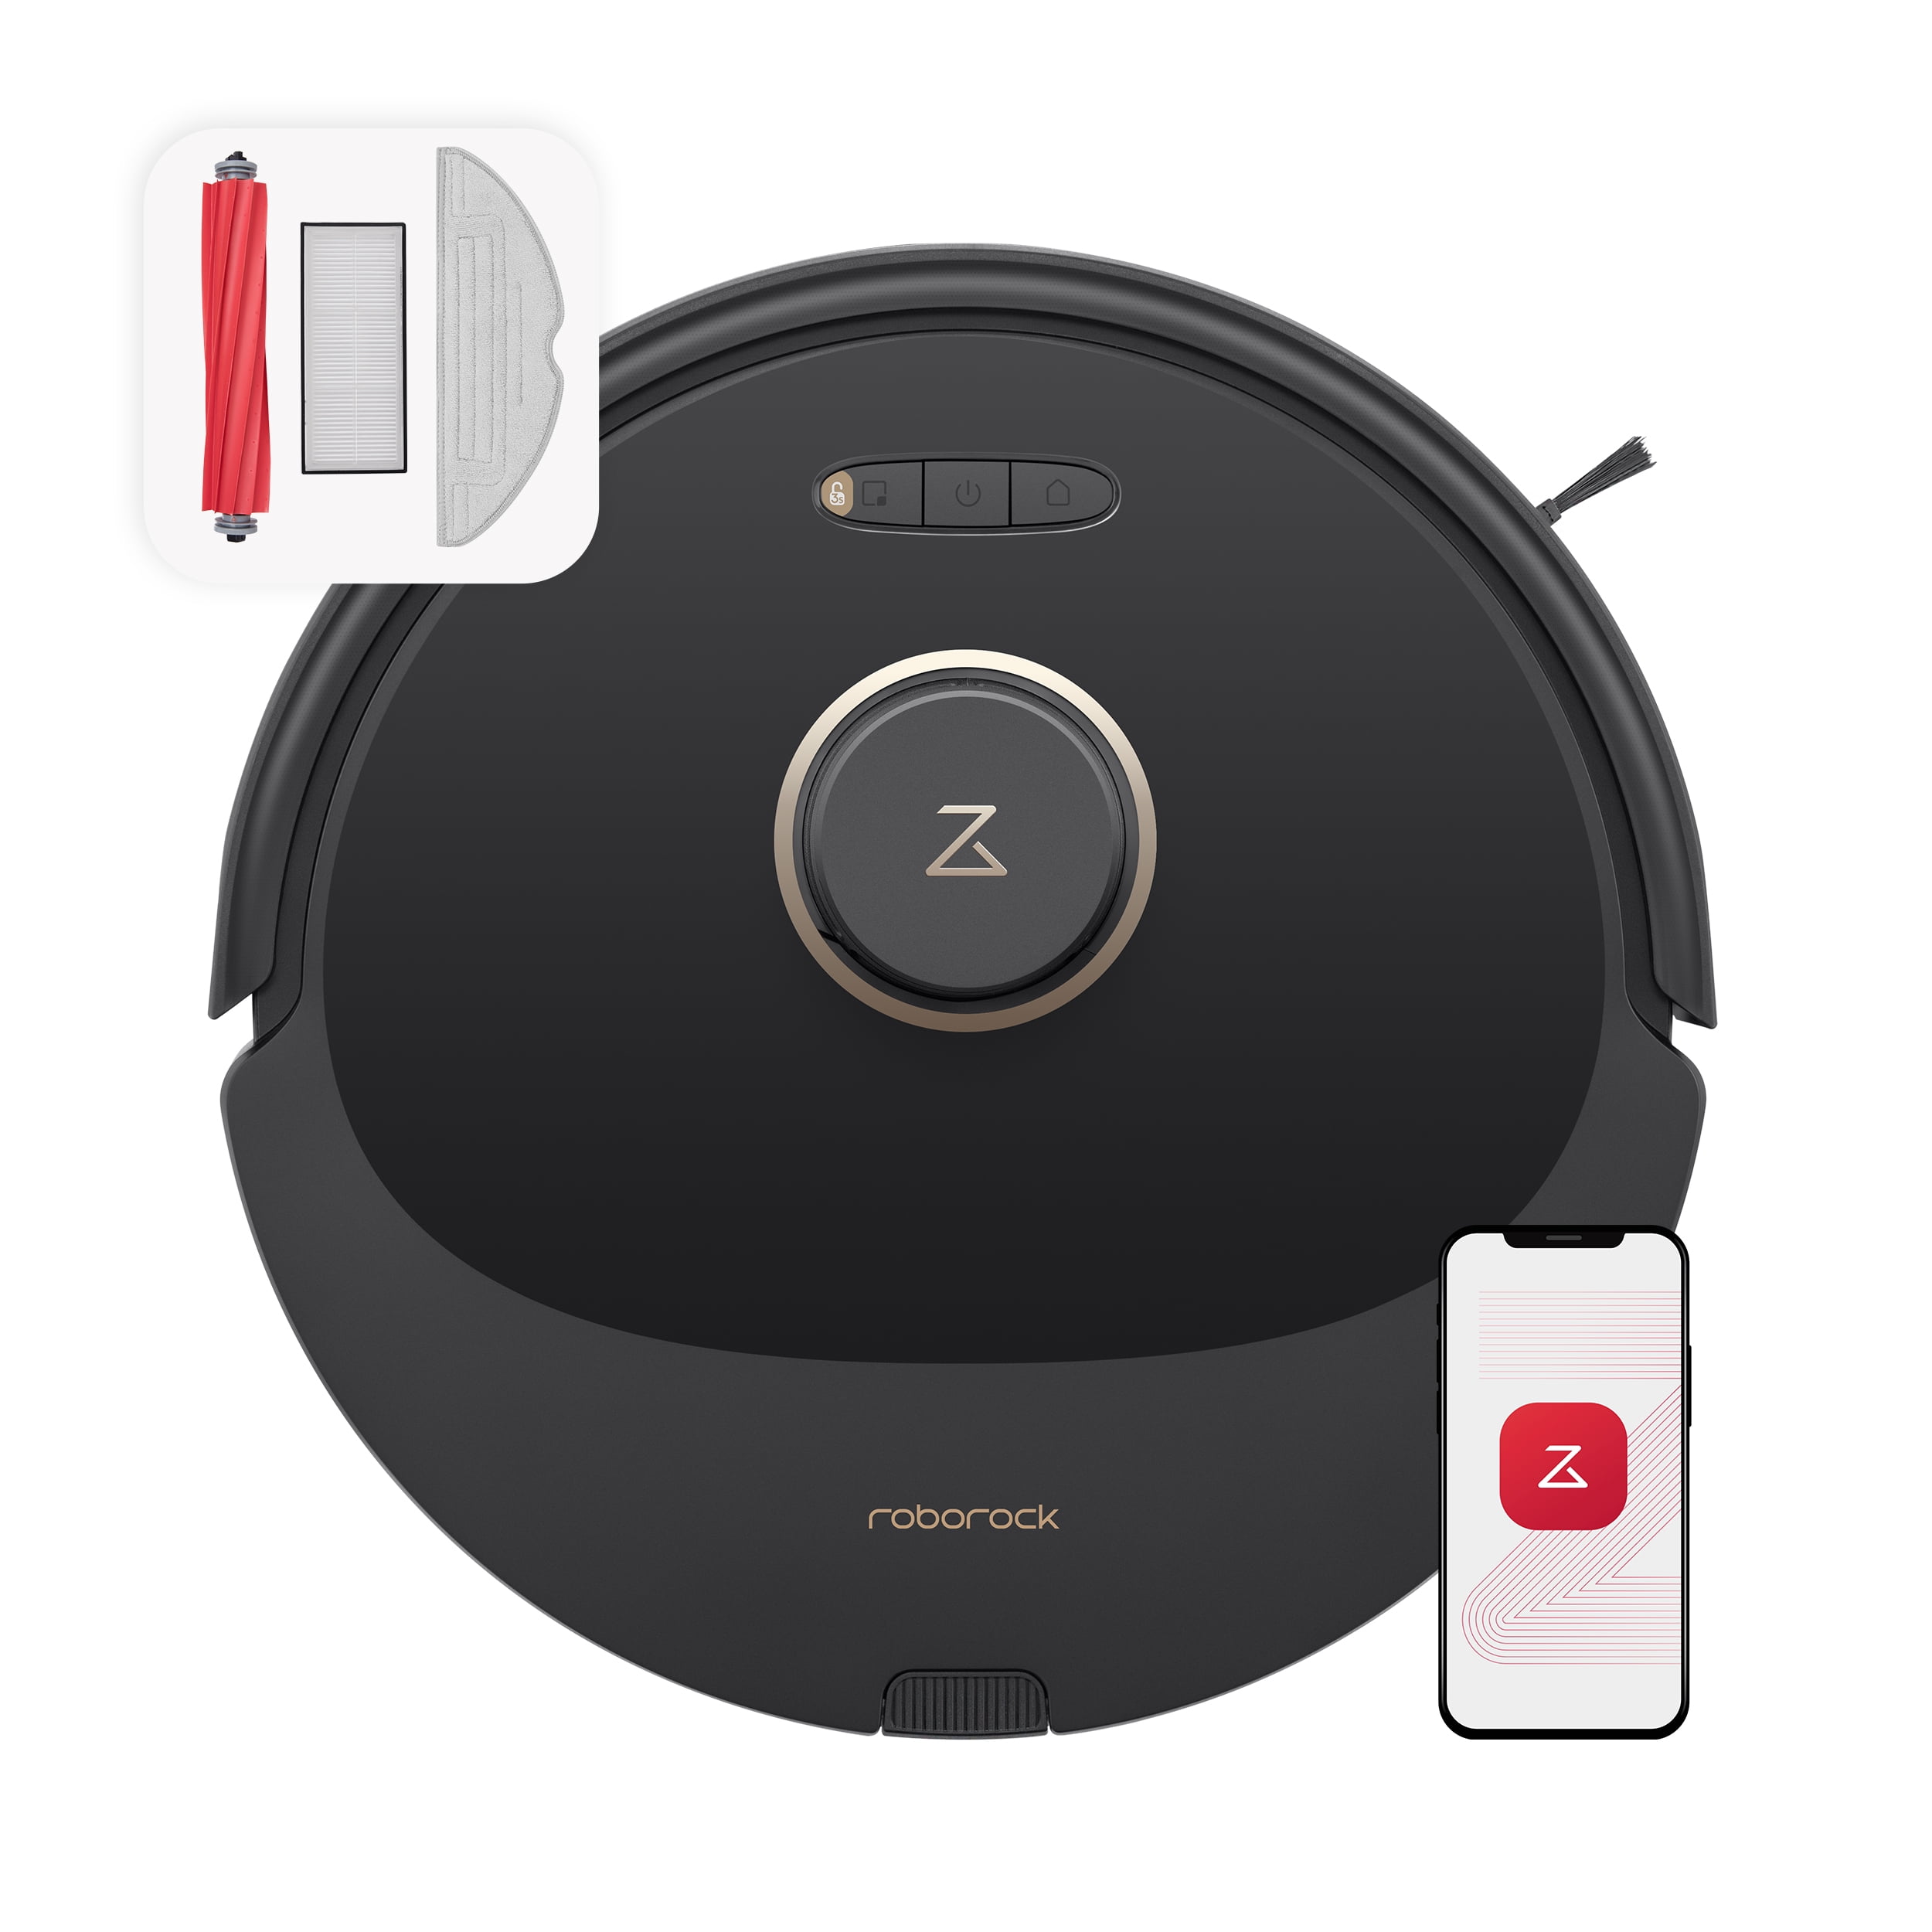 Roborock Q8 Max Robot Vacuum and Mop with Obstacle Avoidance, LiDAR  Navigation, 5500Pa Suction Power, and App Control